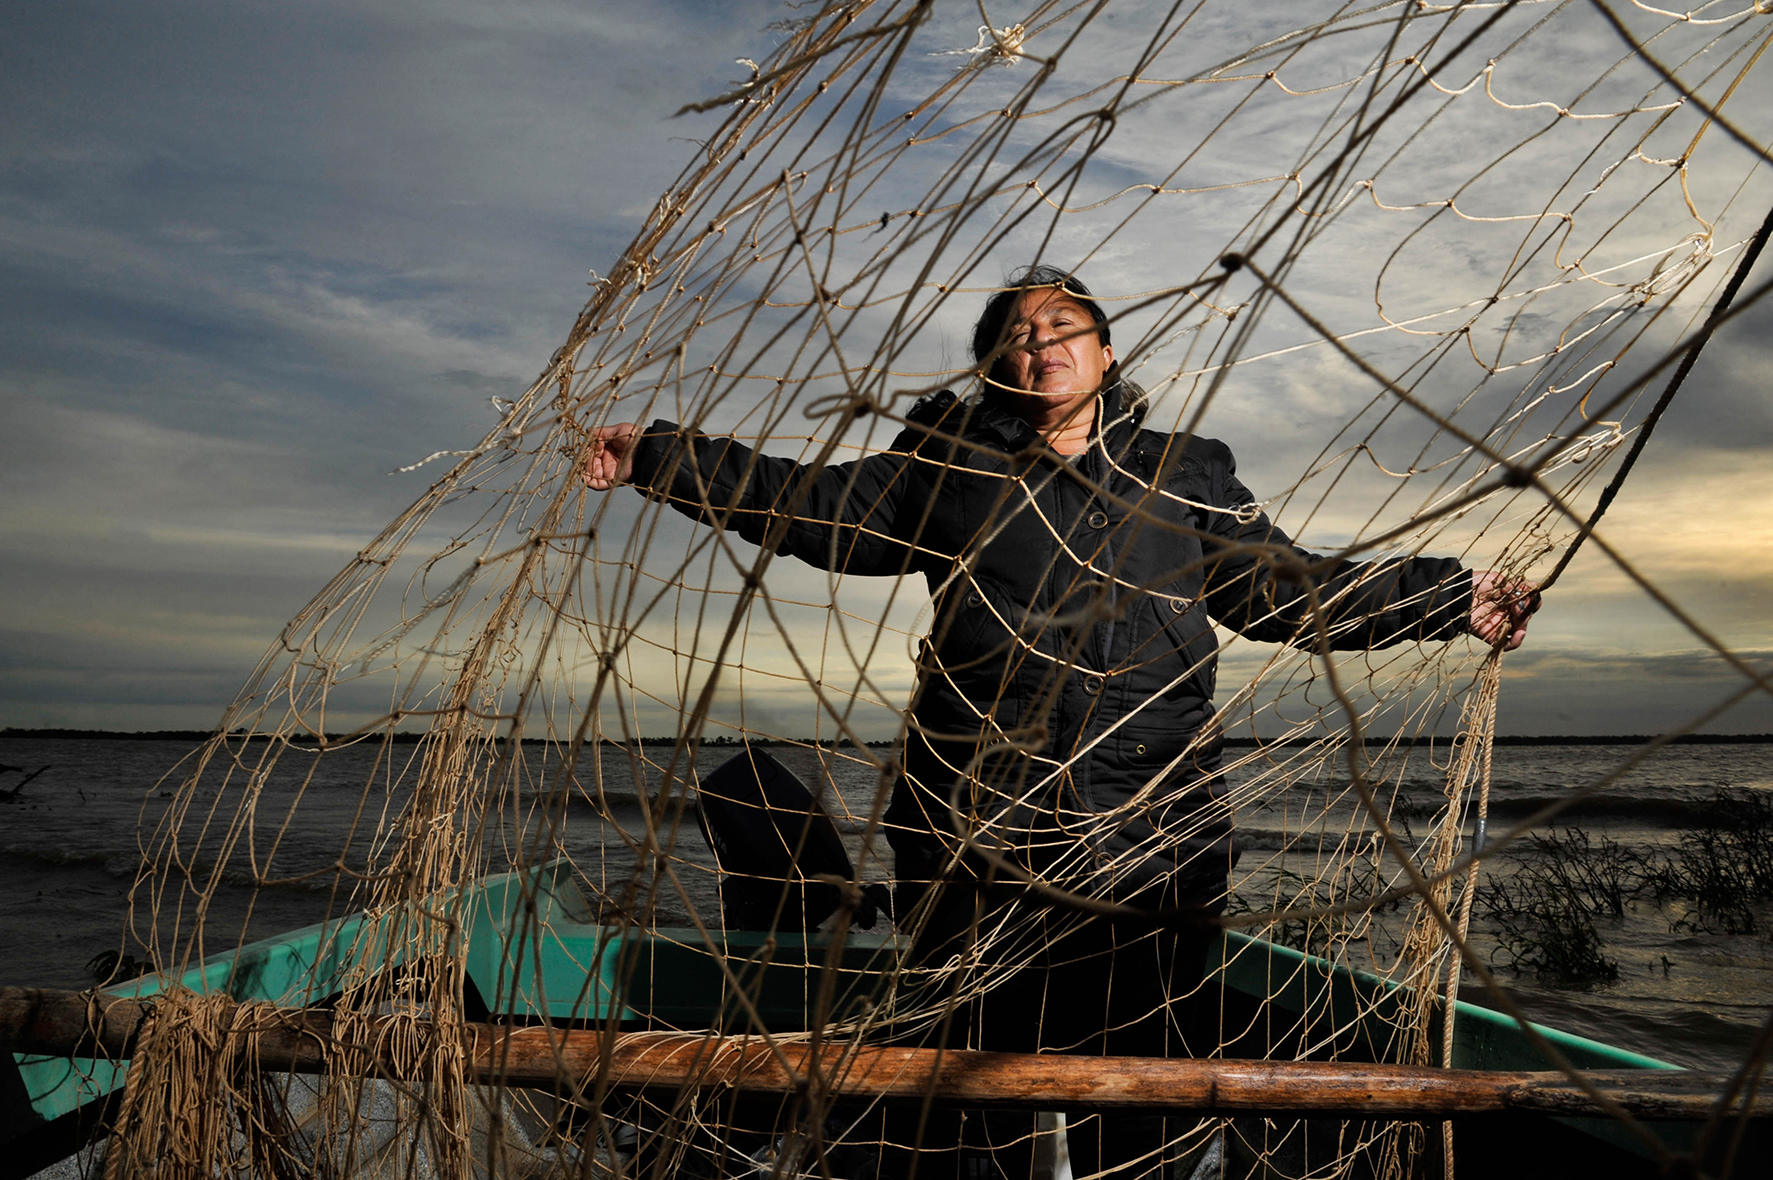 <p>María Barrios handles her net at the Balbi bank of the Paraná river, in Santa Fe province, Argentina. An unprecedented drop in the water level of the river has put a strain on the activities of fishers along its waters, but many are persevering in challenging circumstances. (Image: <a href="https://www.instagram.com/celinamuttilovera/">Celina Mutti Lovera</a> / Territorios y Resistencias)</p>